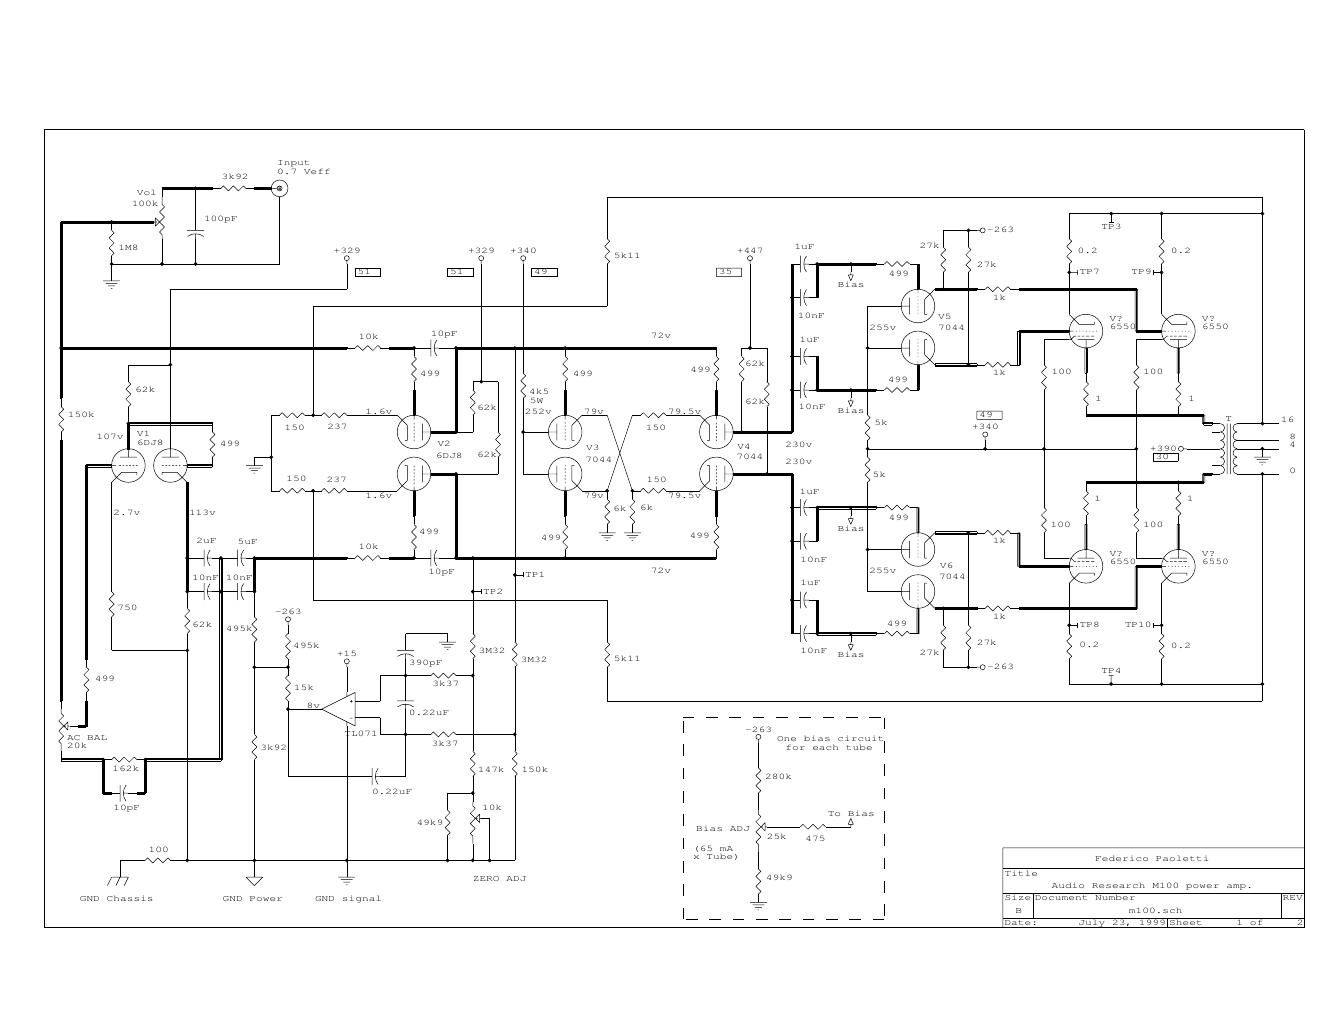 audio research m 100 pwr schematic